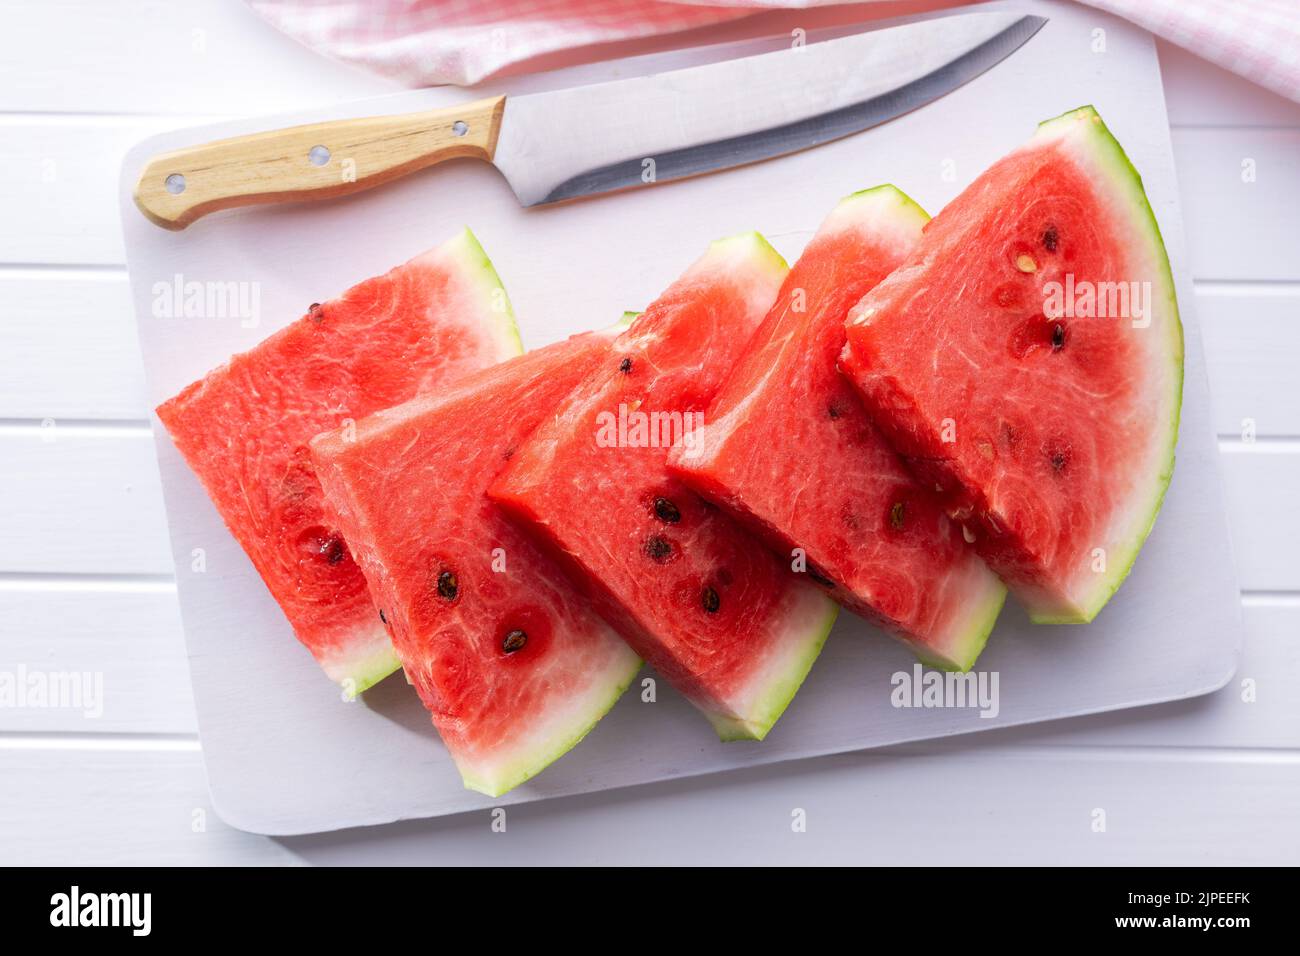 Slices of red watermelon on a cutting board. Top view. Stock Photo